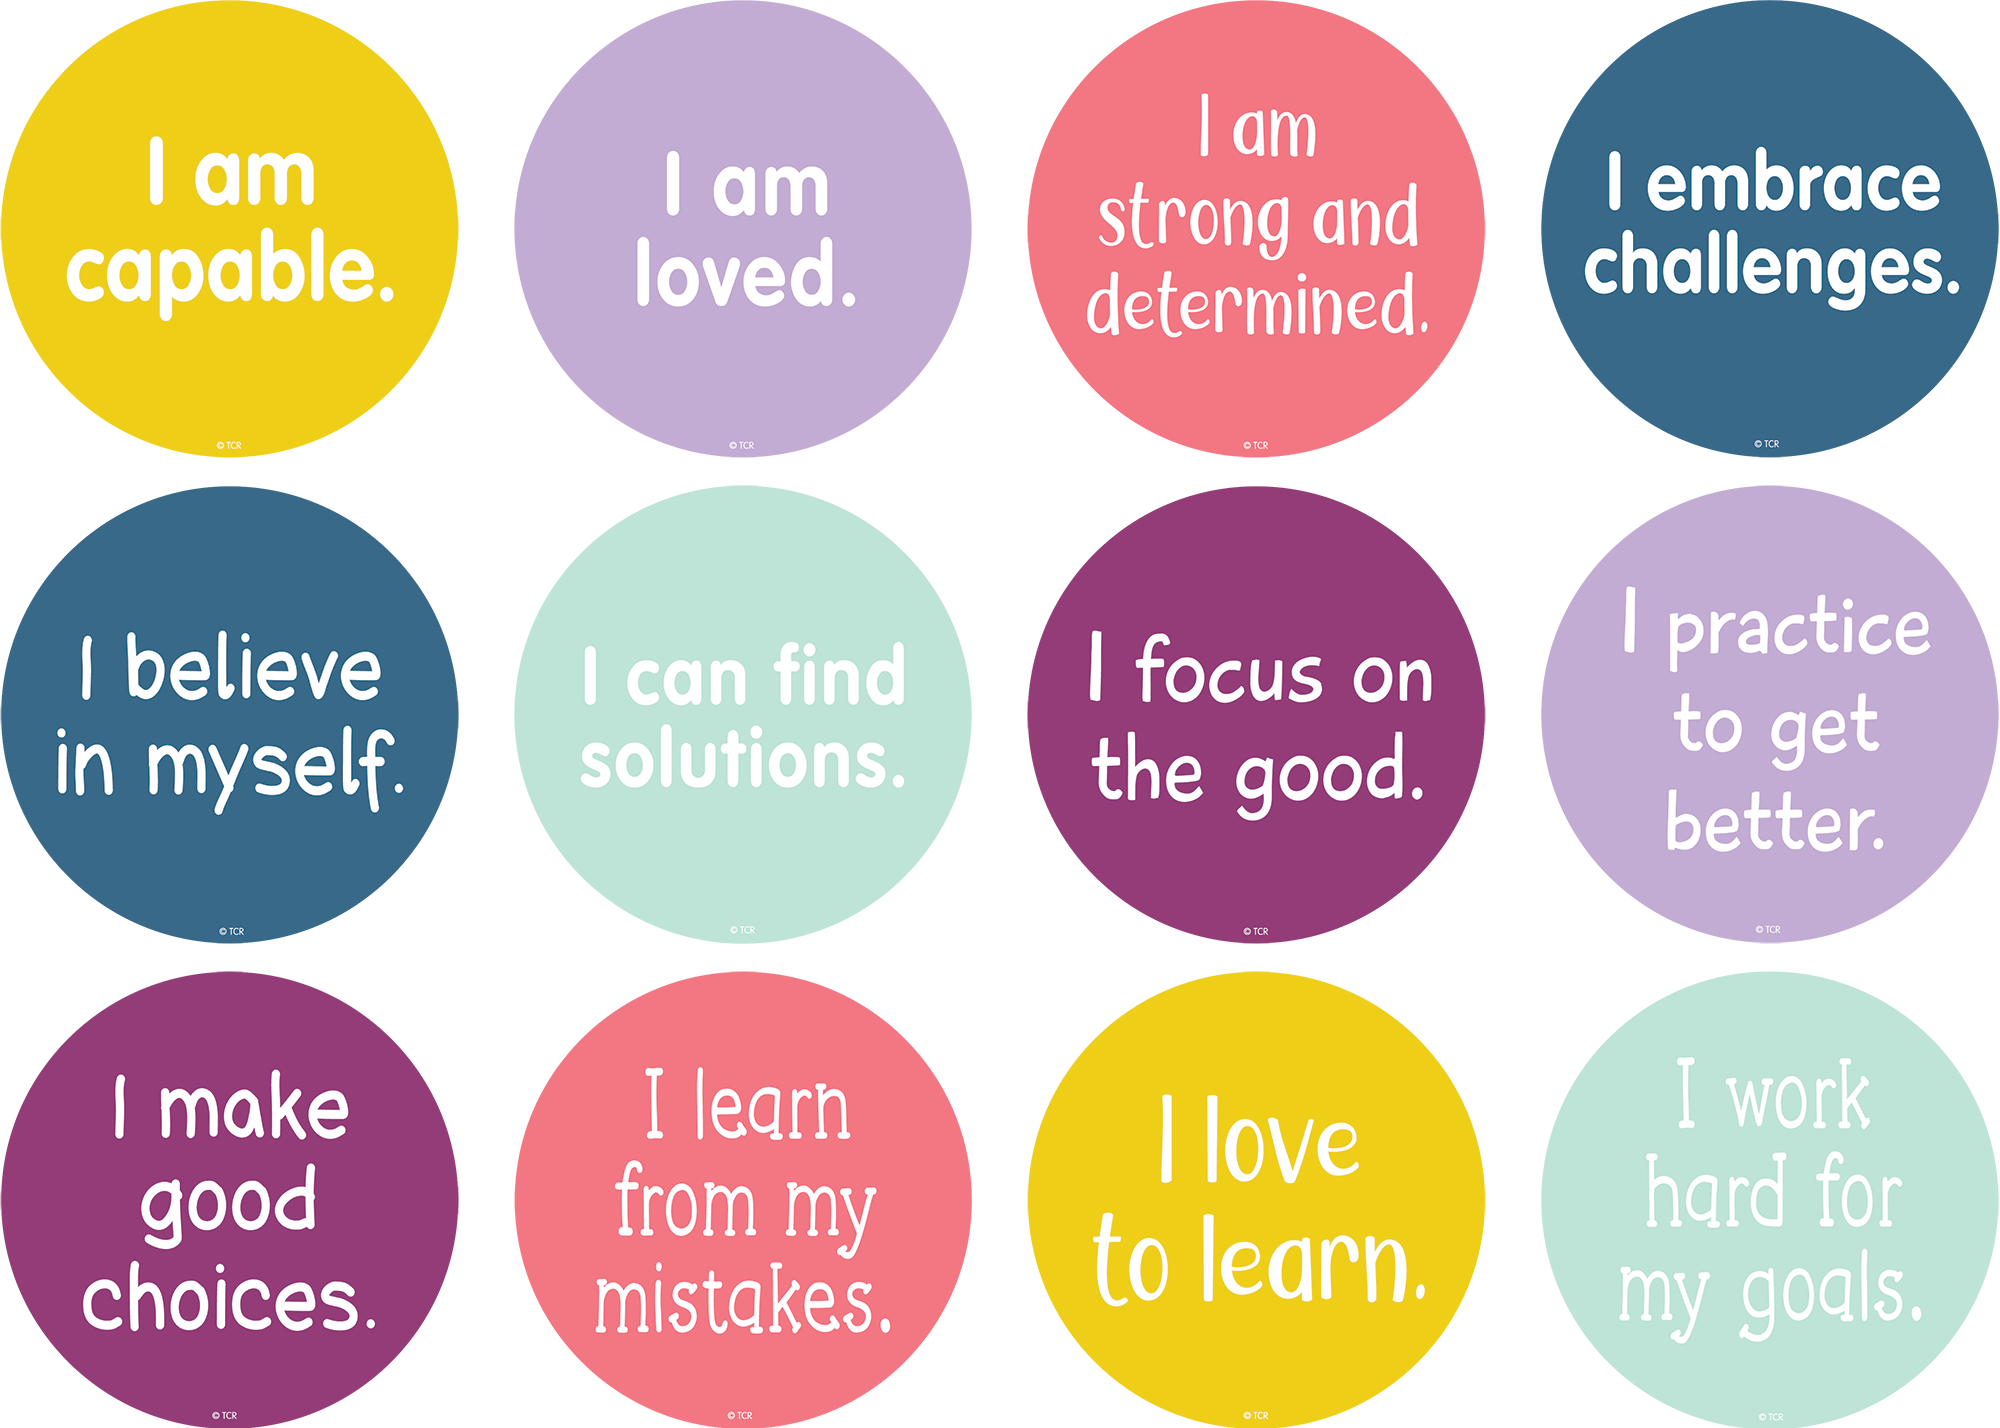 Positive Mindset sayings include: I can find solutions, I love to learn, I make good choices, I embrace challenges, I learn from my mistakes, I practice to get better, I work hard for my goals, I am capable, I focus on the good, I believe in myself, I am strong and determined, I am loved